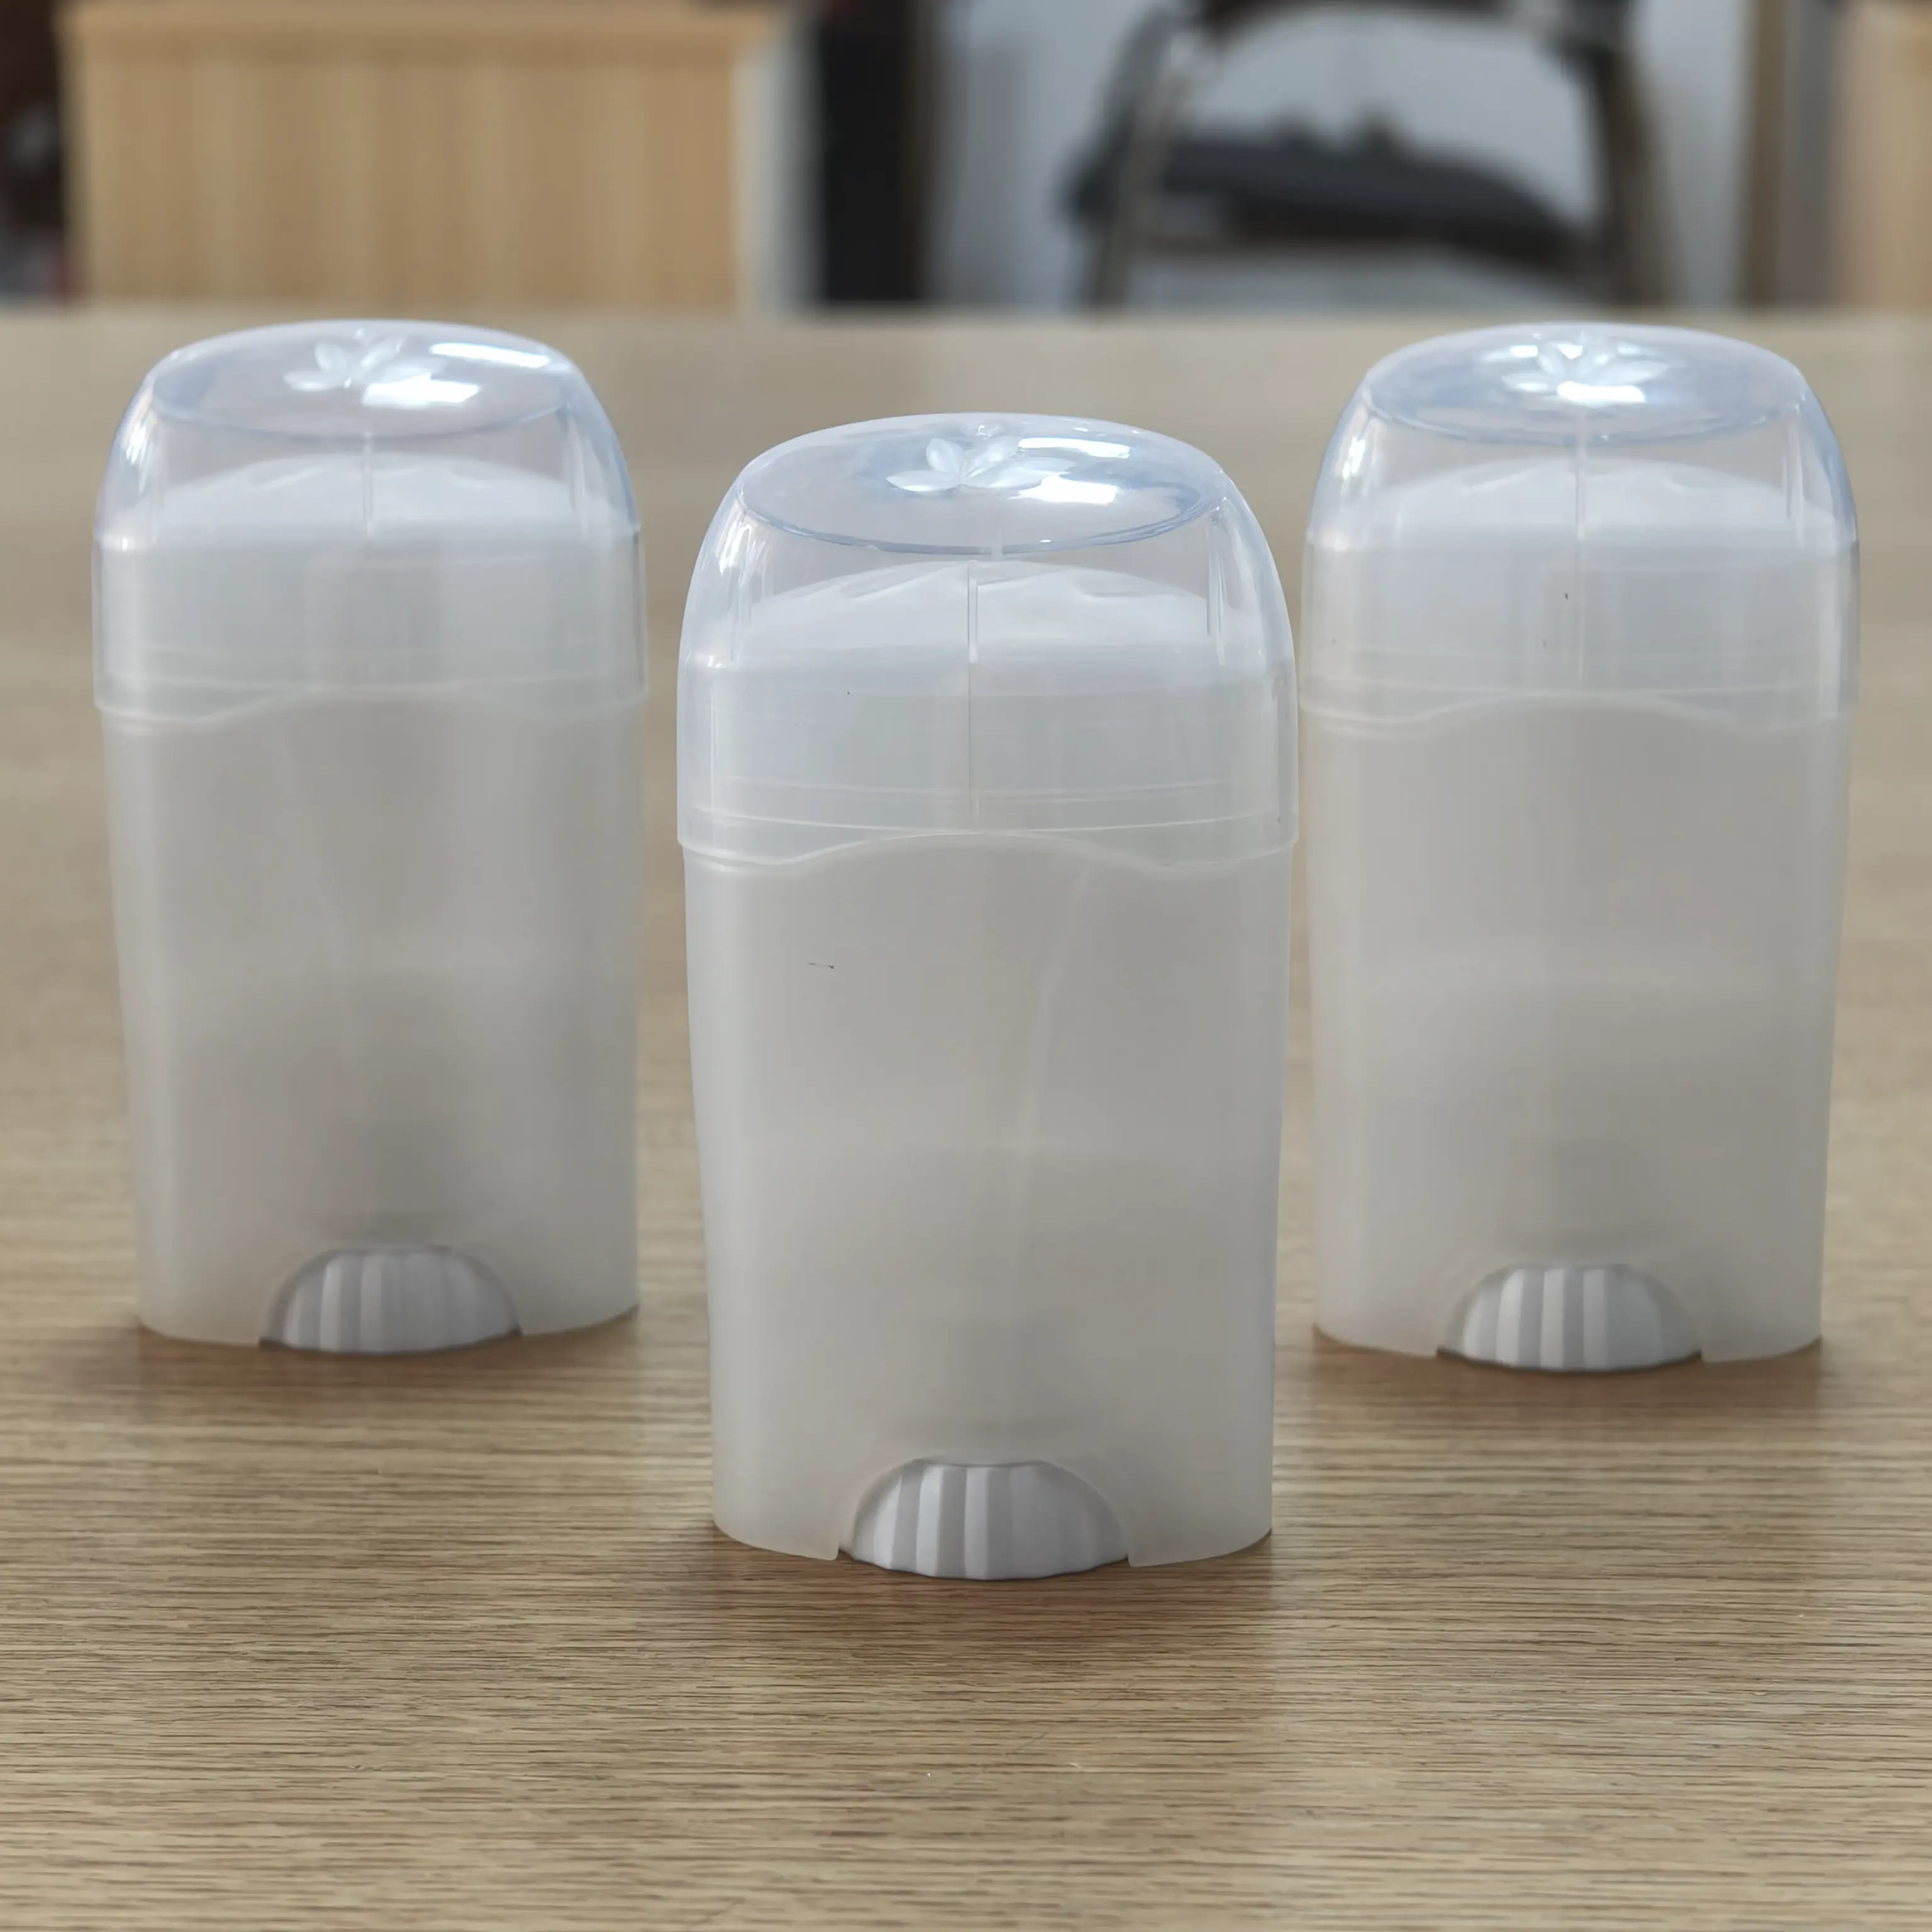 OEM ODM top filling packaging custom color empty twist-up plastic clear gel deodorant container with sifter lids